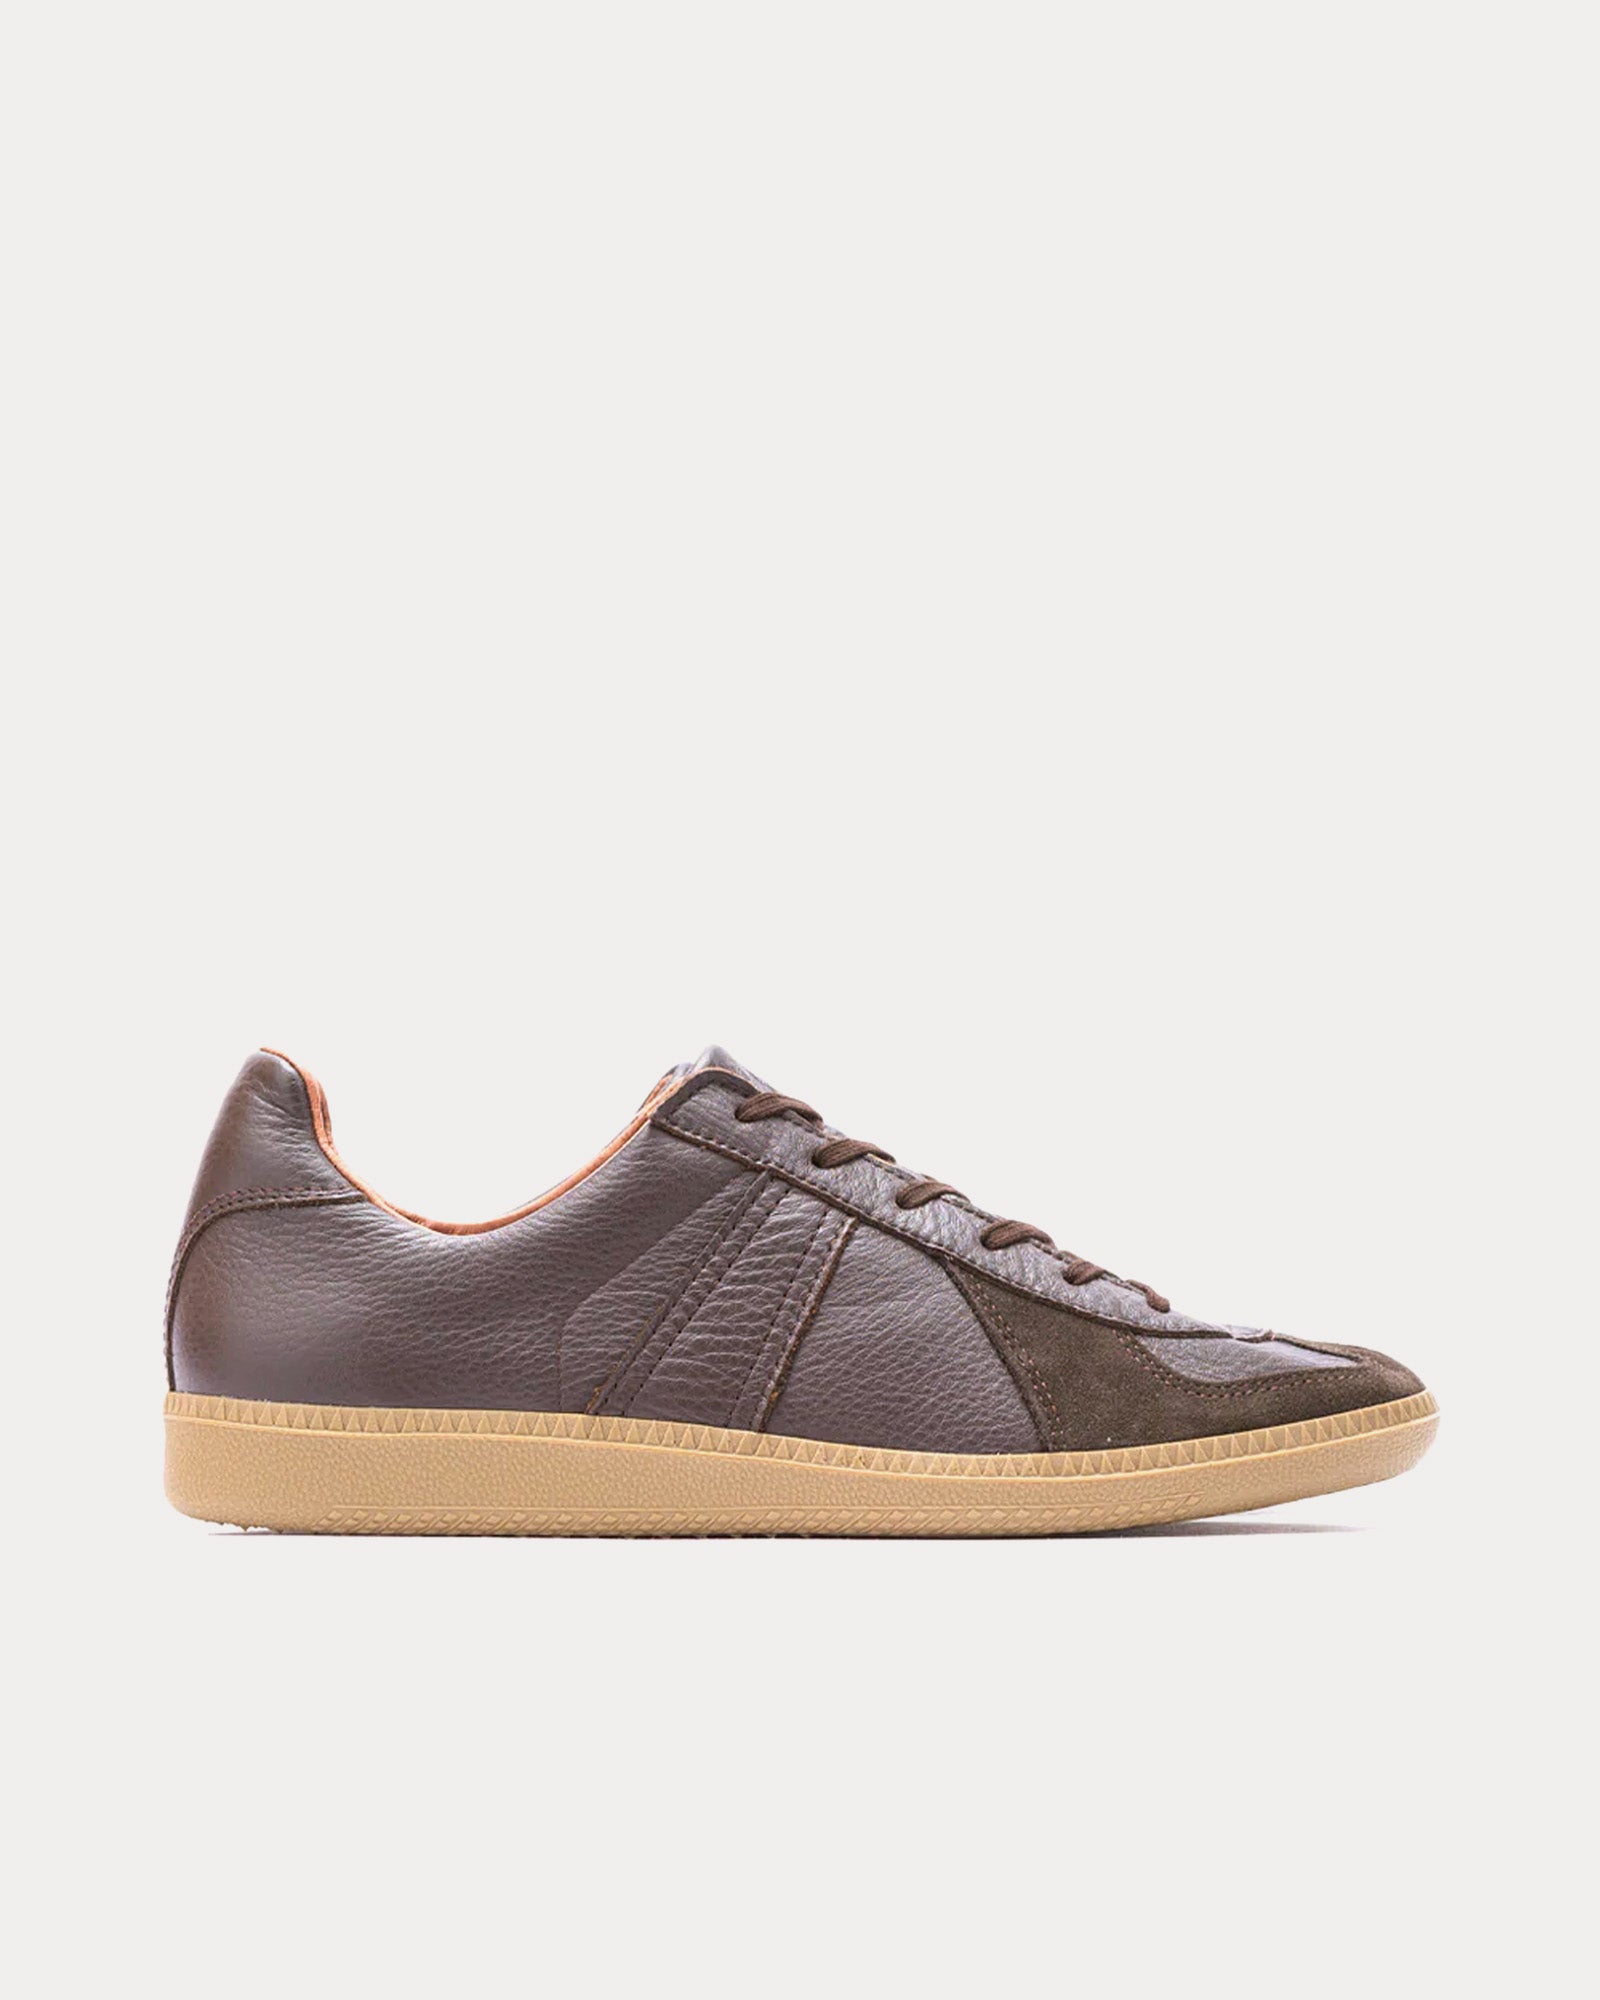 Reproduction of Found - German Army Trainer Dark Brown Low Top Sneakers